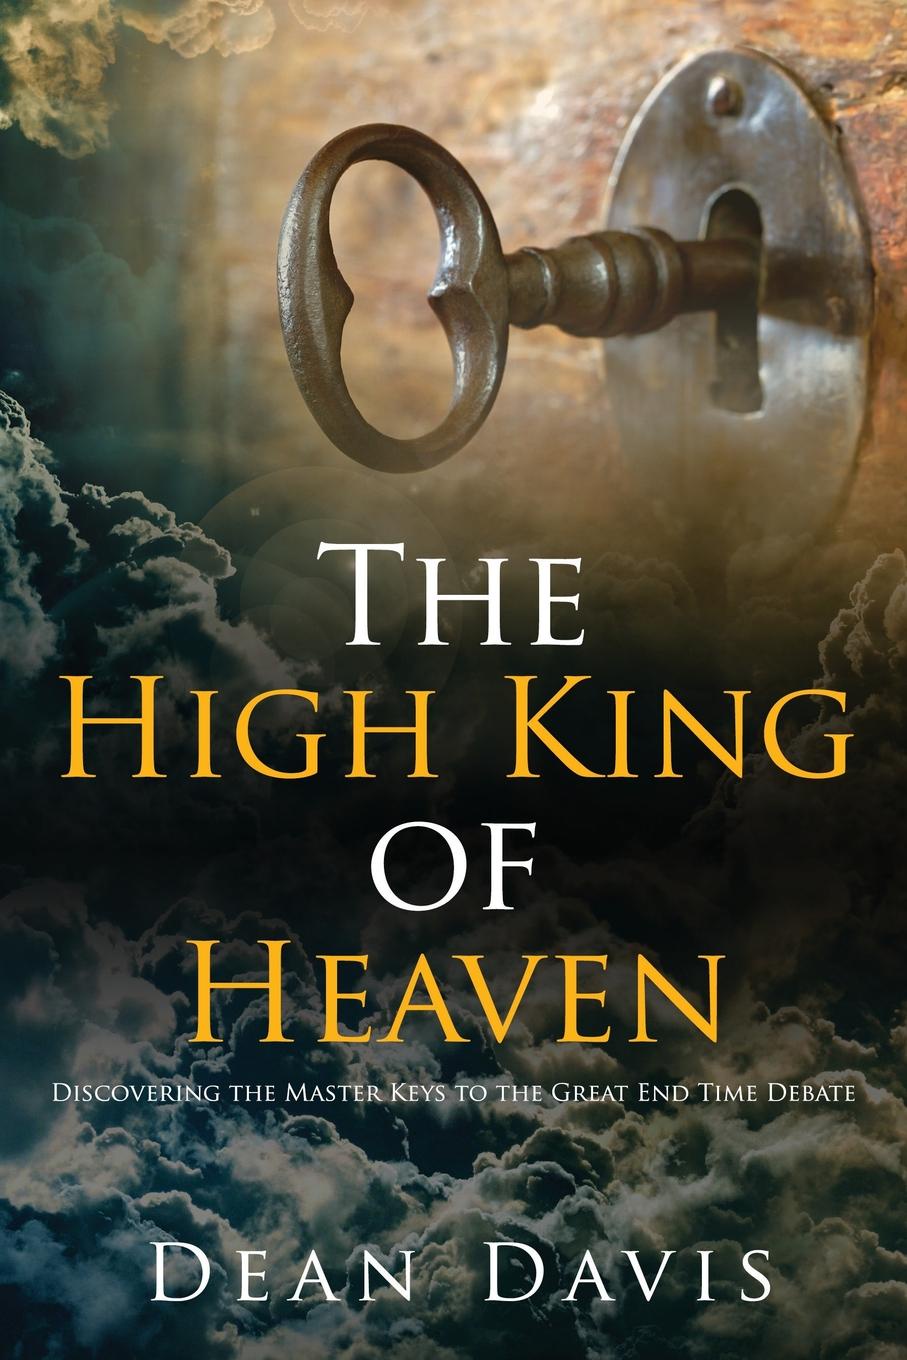 The High King of Heaven